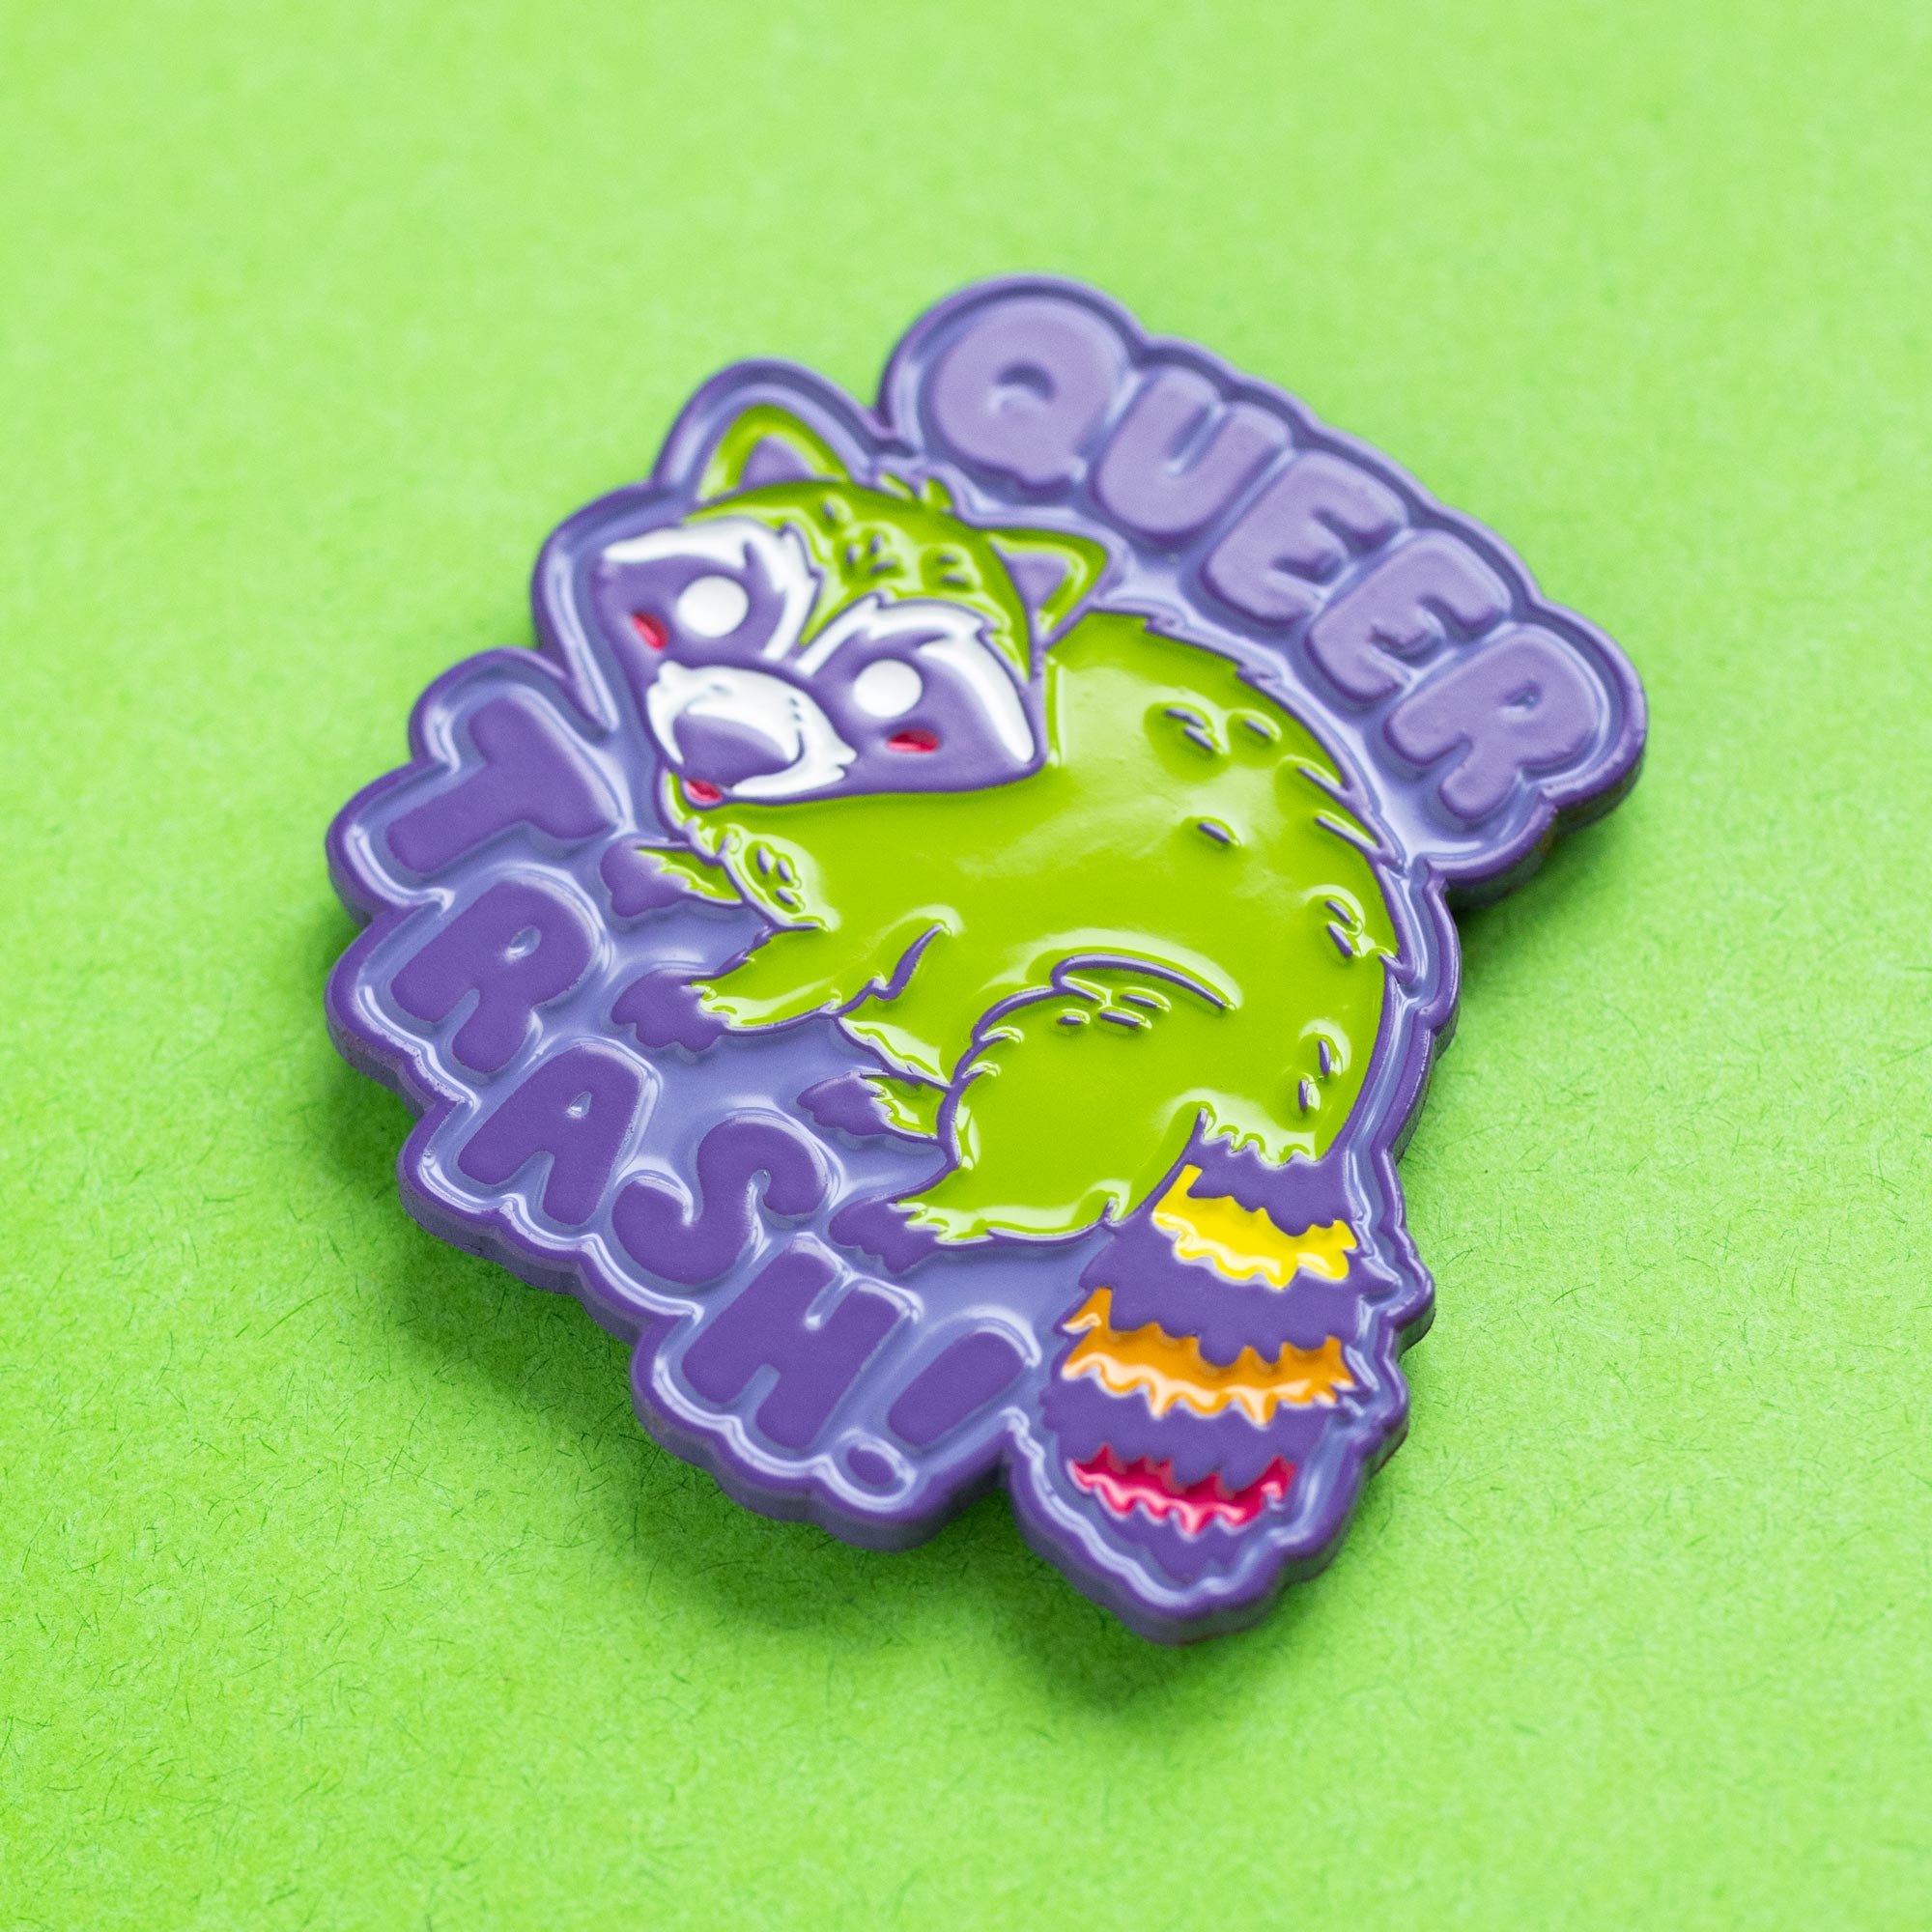 Queer Trash Pin